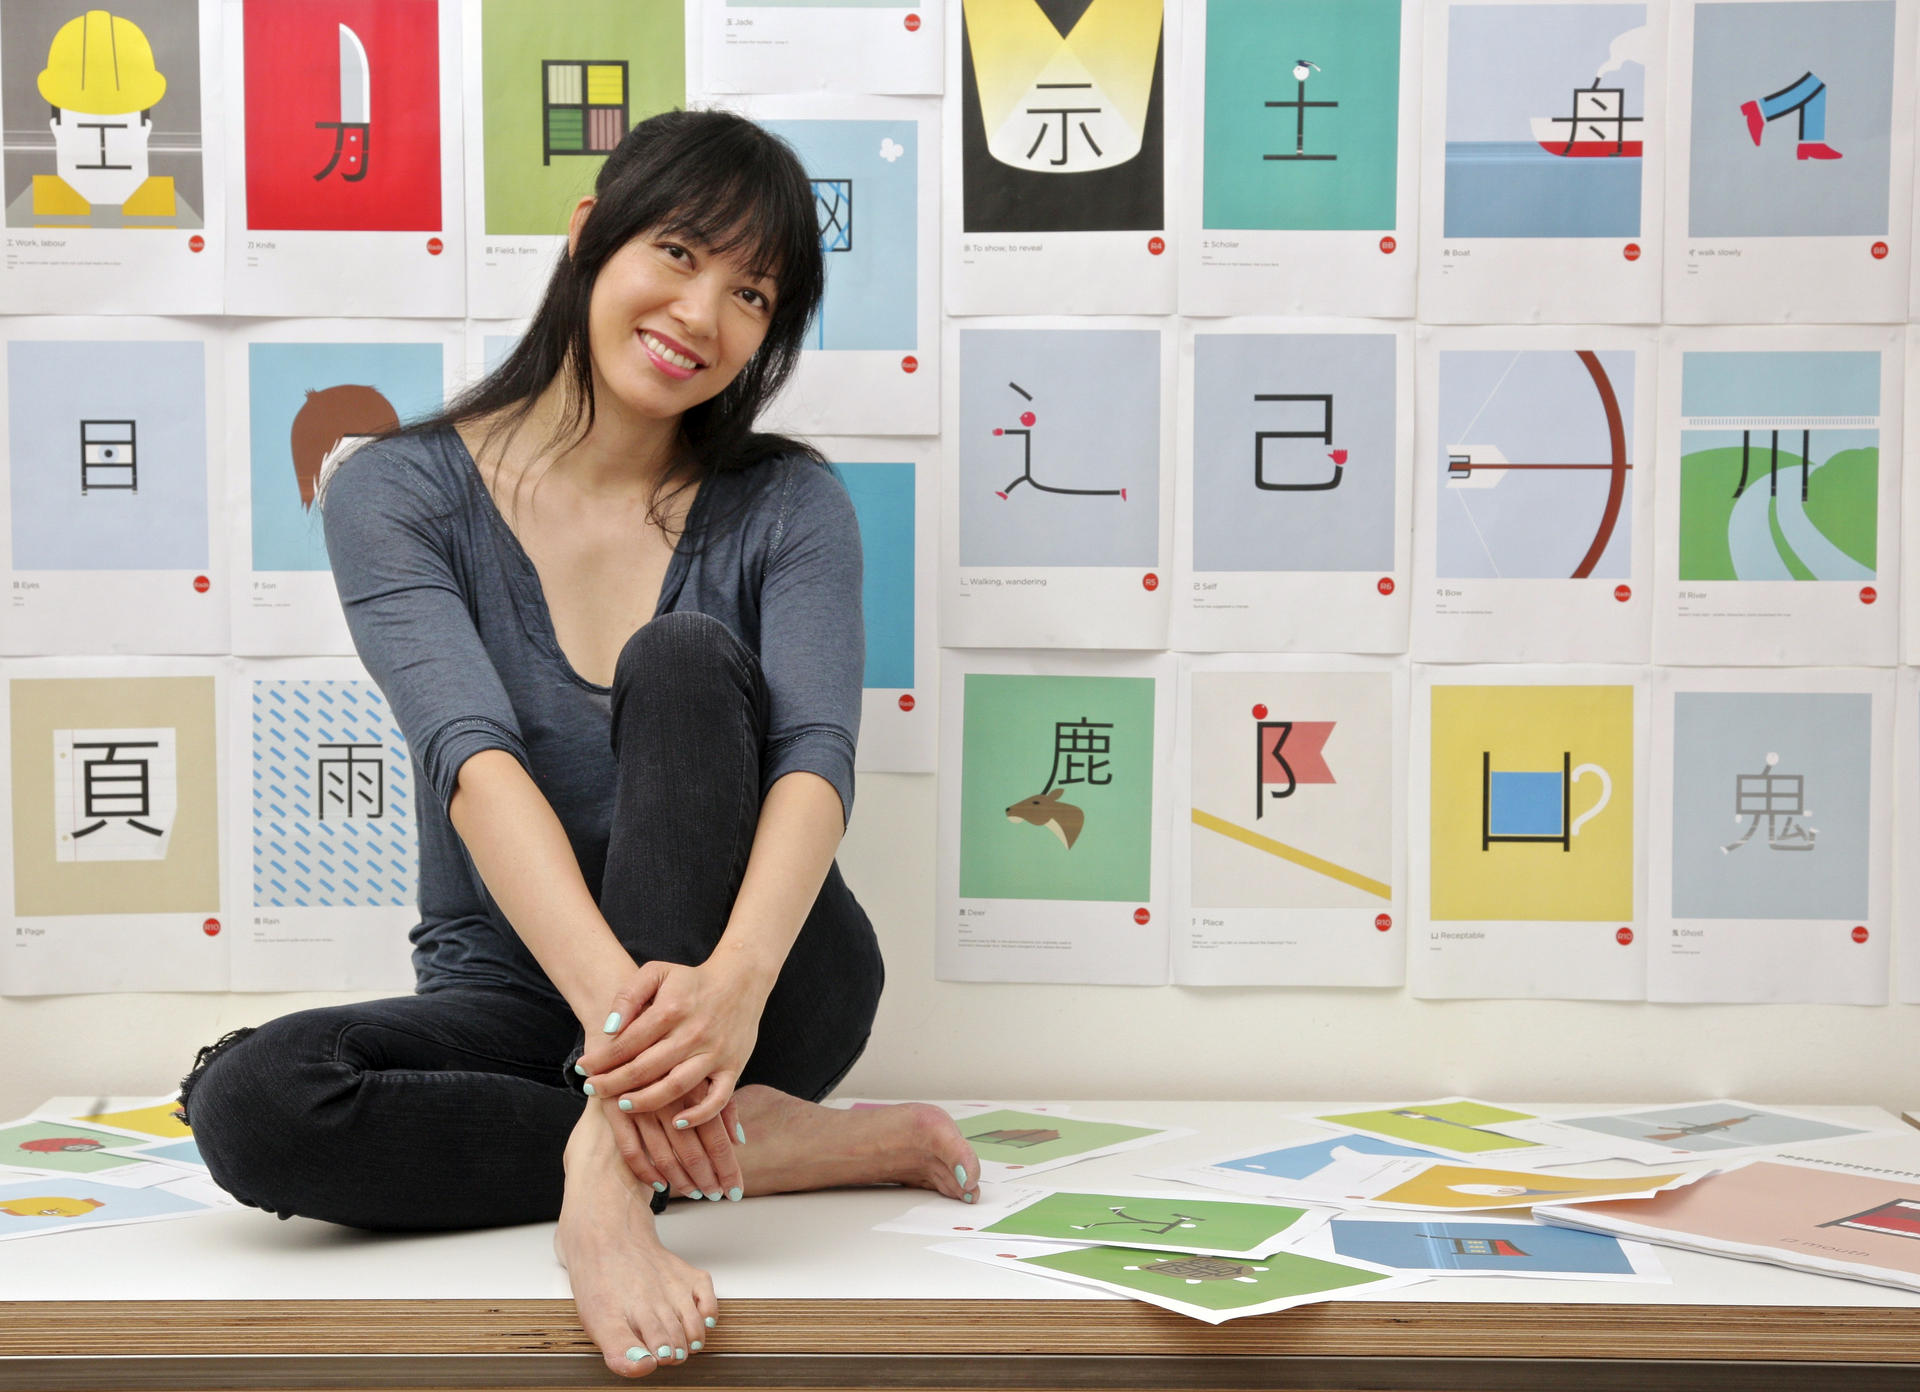 Shaolan Hsueh, an entrepreneur, developed her system after exhausting other ways to teach Chinese to her children. Photo: SMP